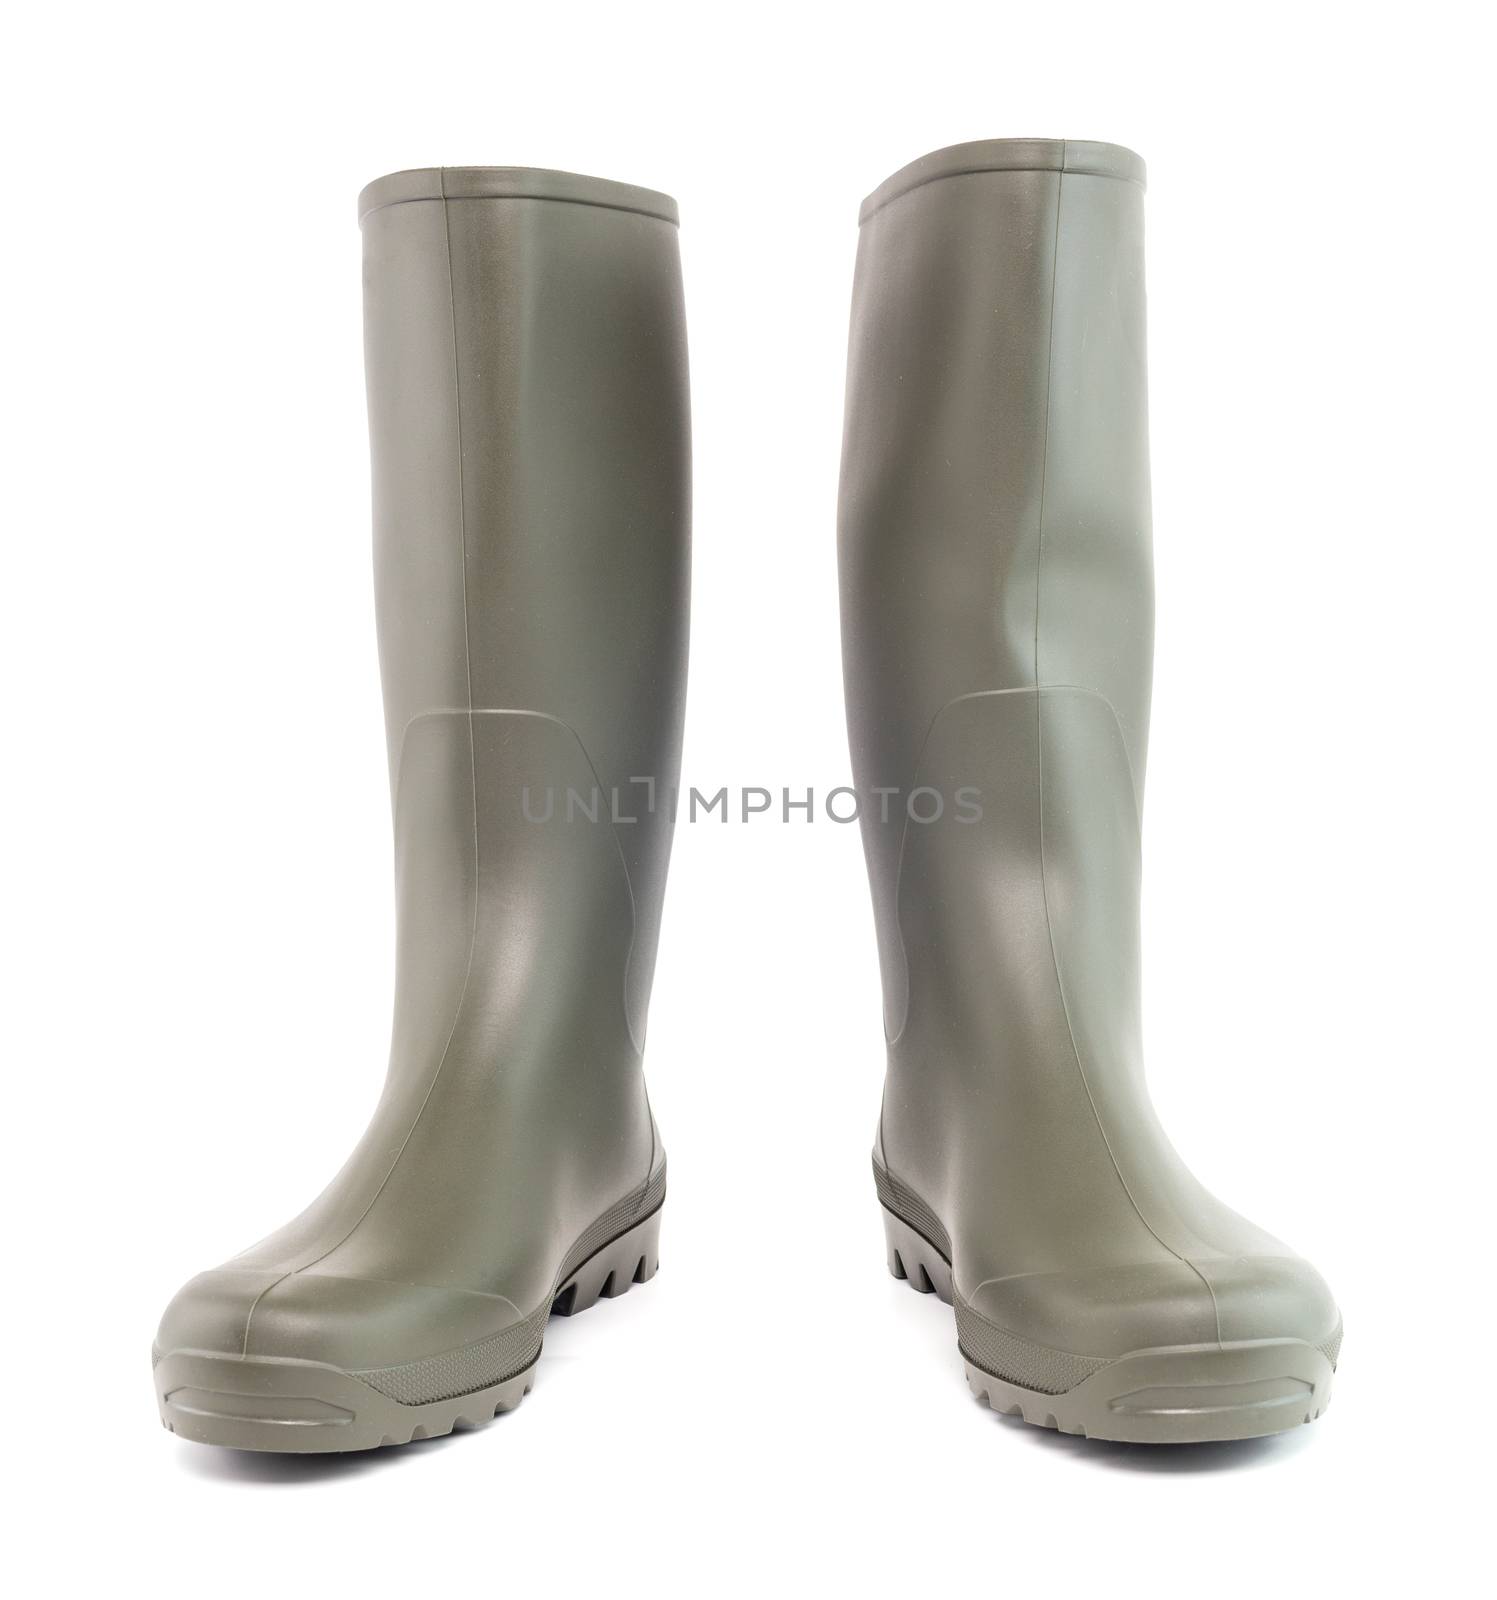 A pair of clean green rubber boots standing up, isolated on white background. Front view. by z1b